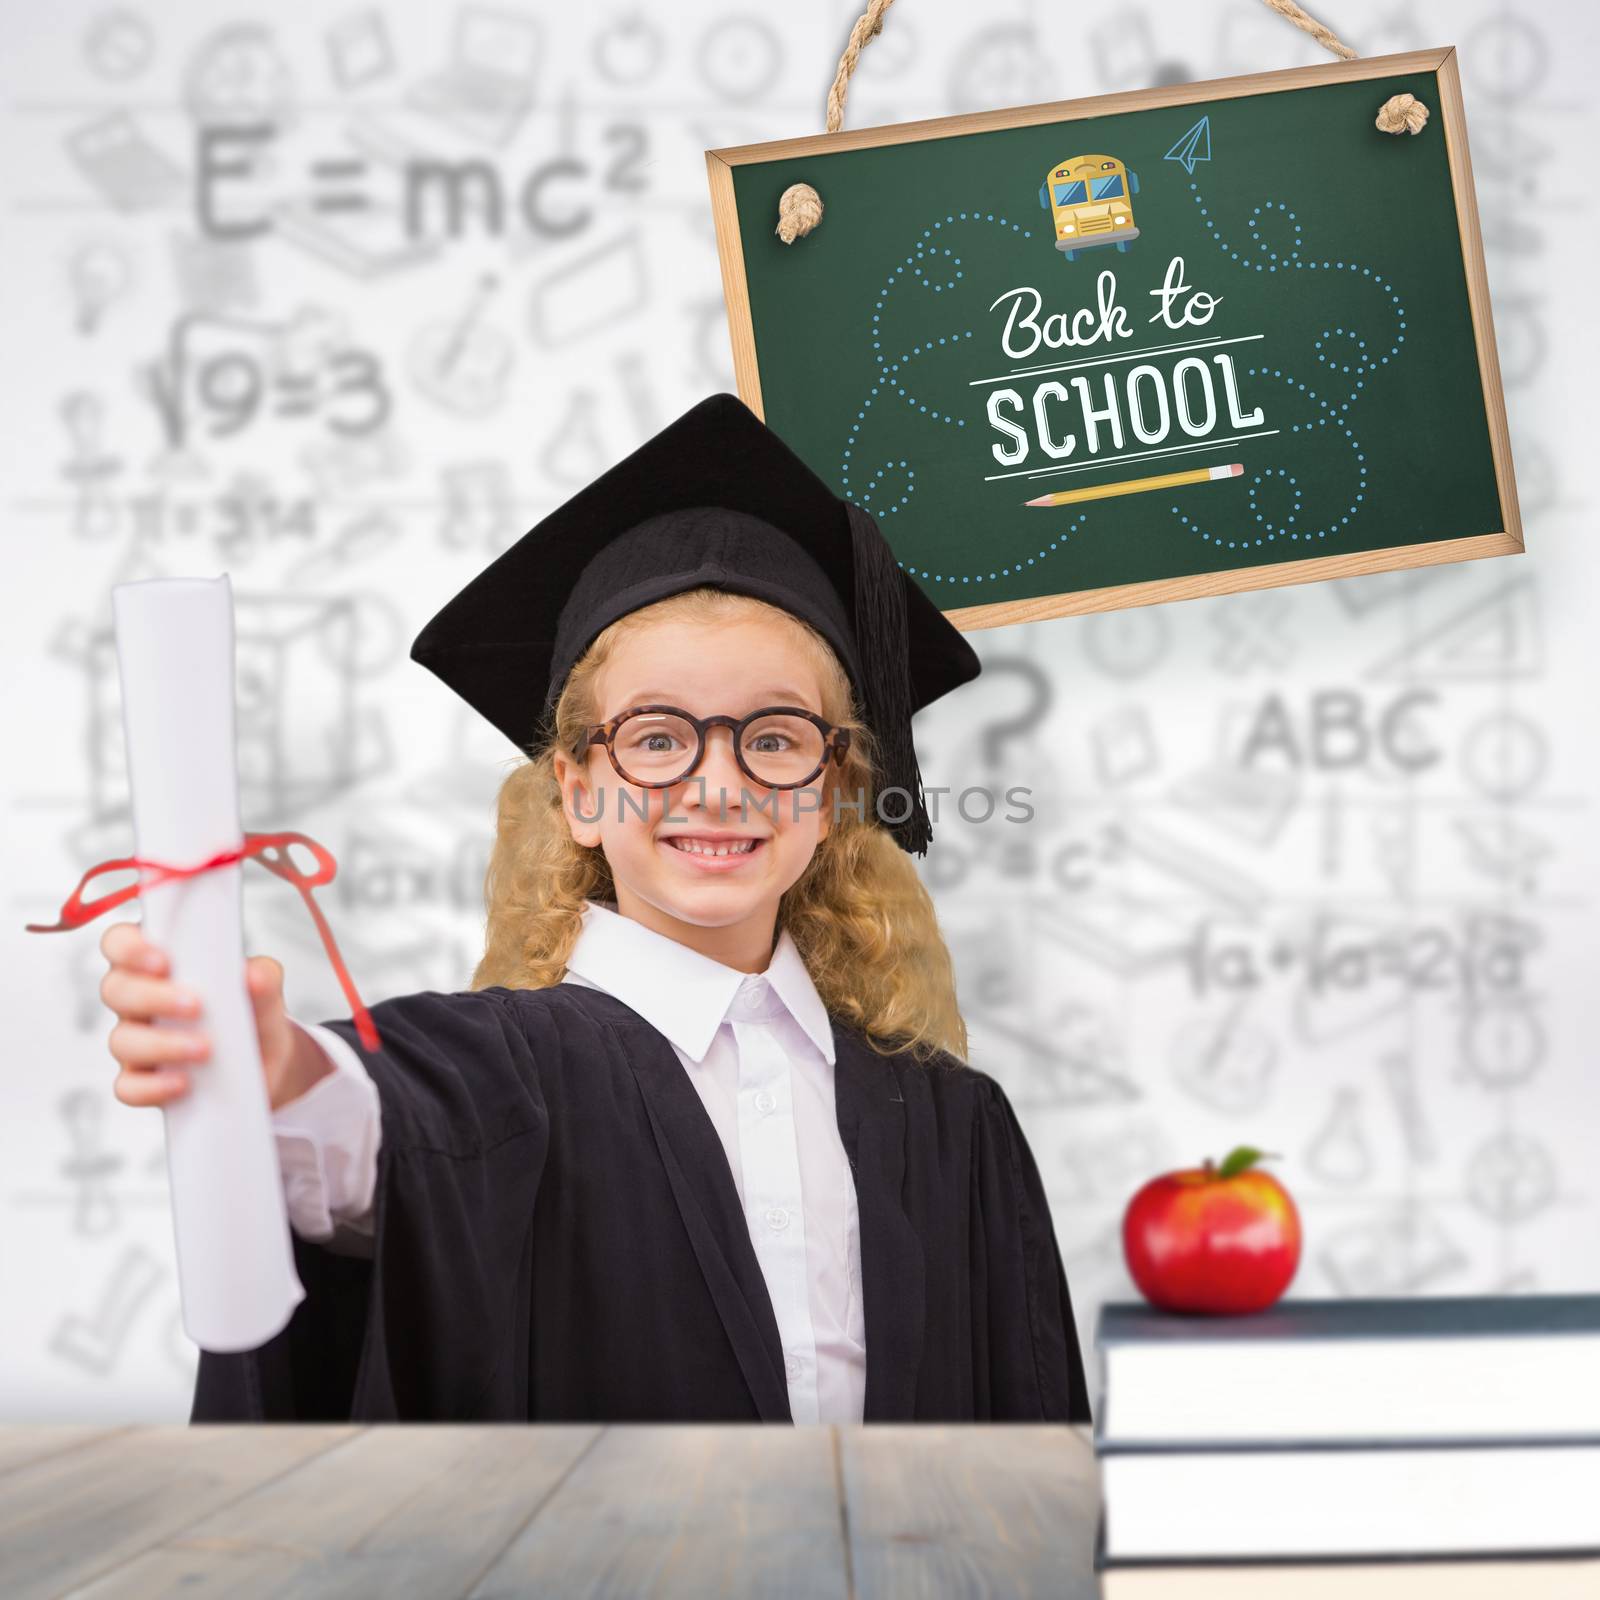 Composite image of schoolgirl with graduation robe and holding her diploma by Wavebreakmedia